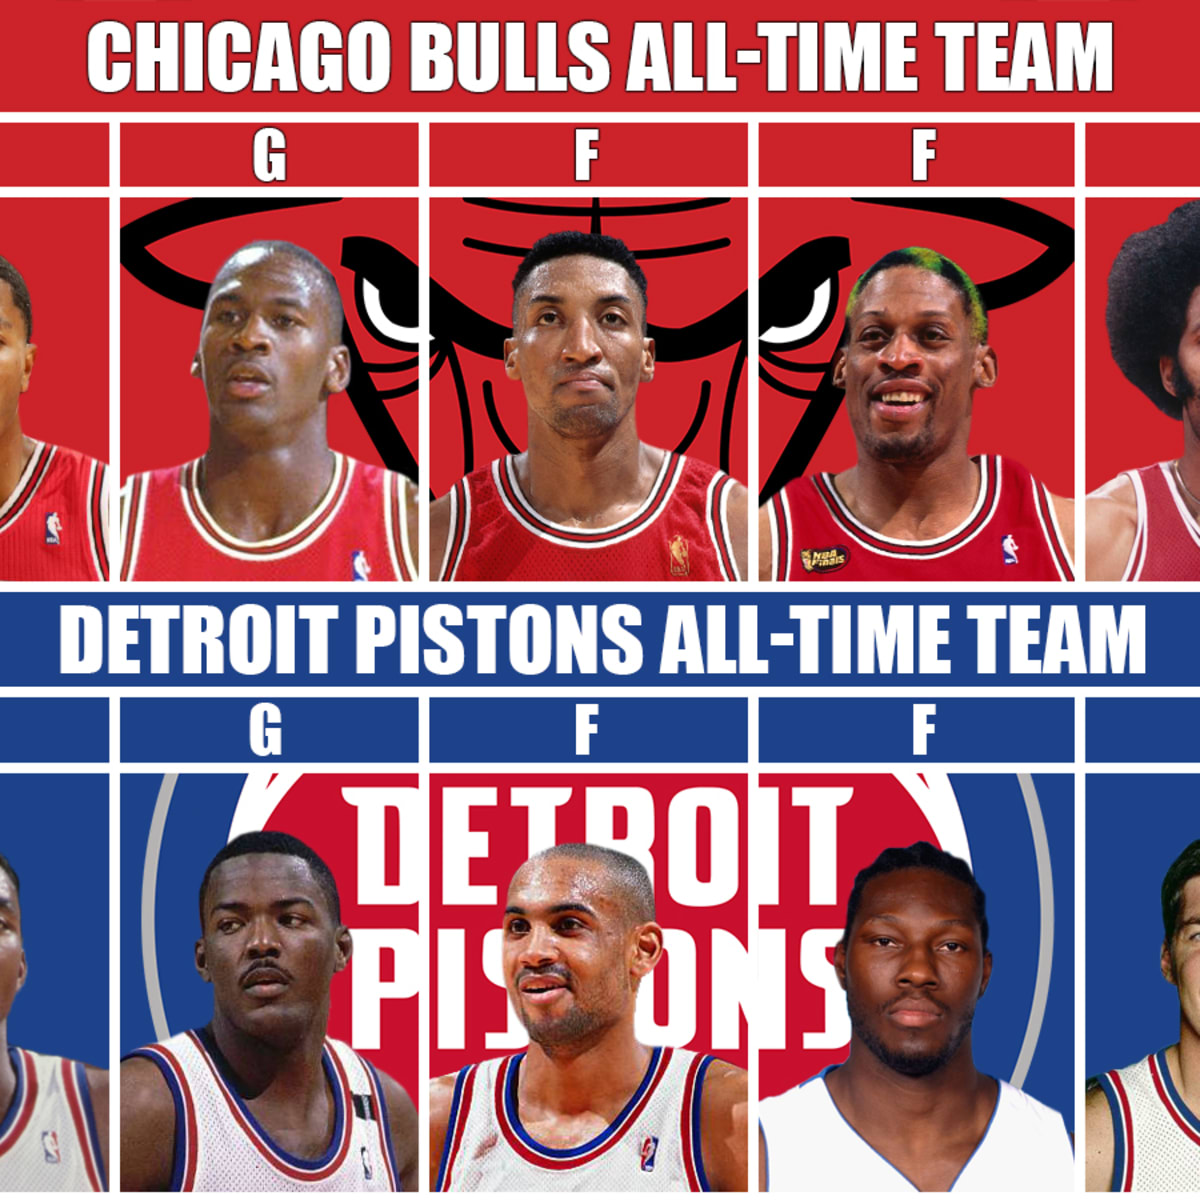 The Detroit Pistons All-Time Starting 5 is Almost All Bad Boys